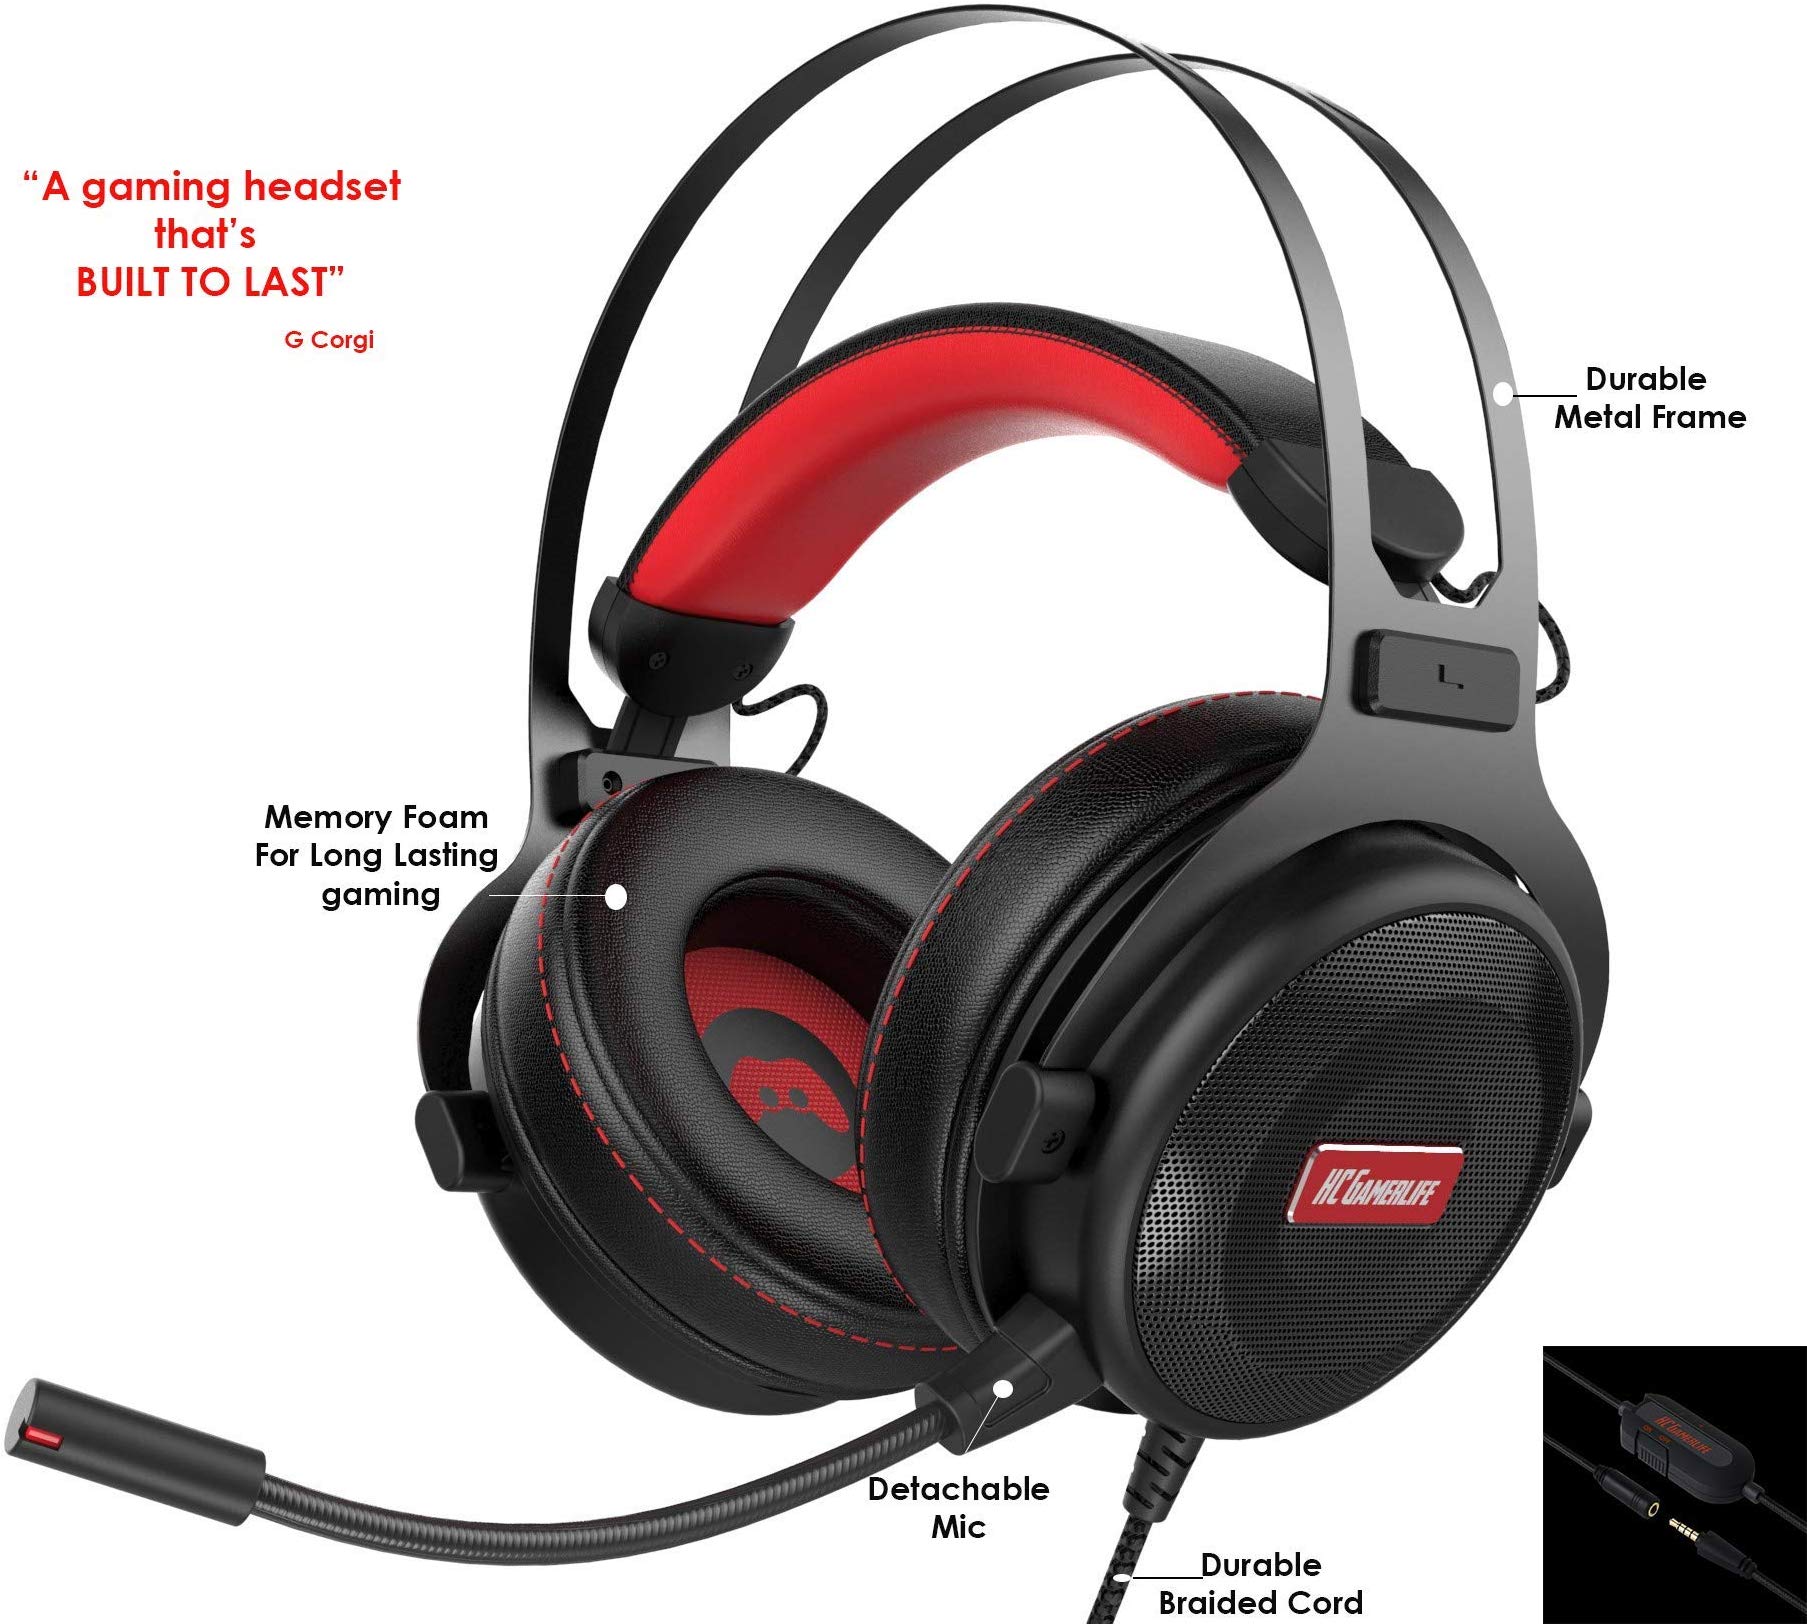 Pro Gaming Headset with Mic (Universal) Video Gamer Wired Headphones | Xbox One, PS4, PC, Laptop, and Mobile Device Compatible| Stereo Sound, 3.5mm Connection | HC Gamer Life